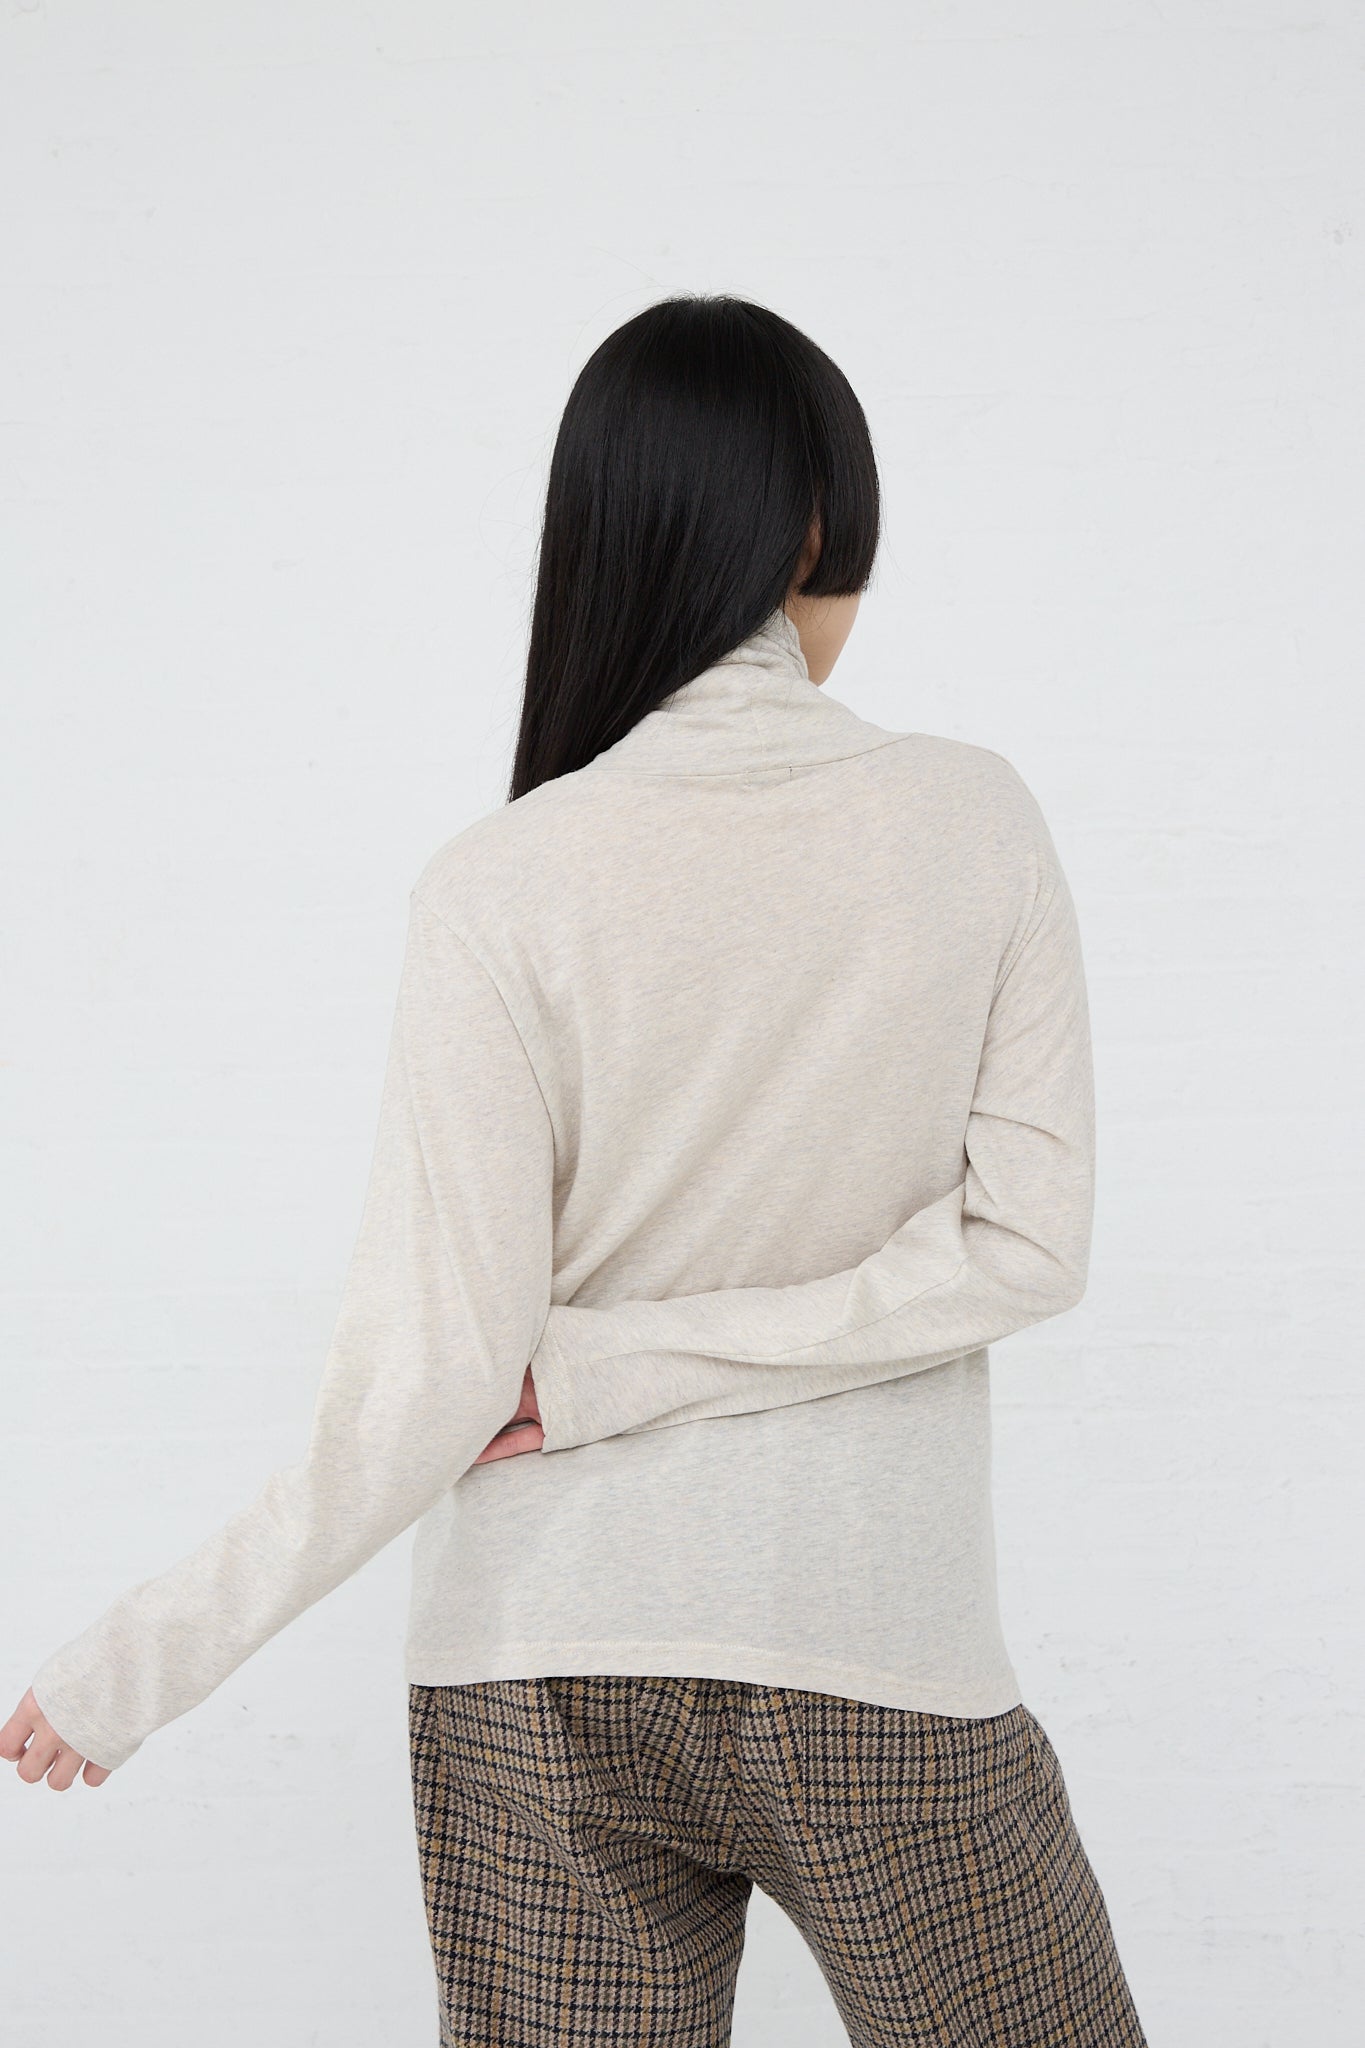 The back of a woman wearing an Ichi Cotton Knit Turtleneck in Oatmeal sweater.